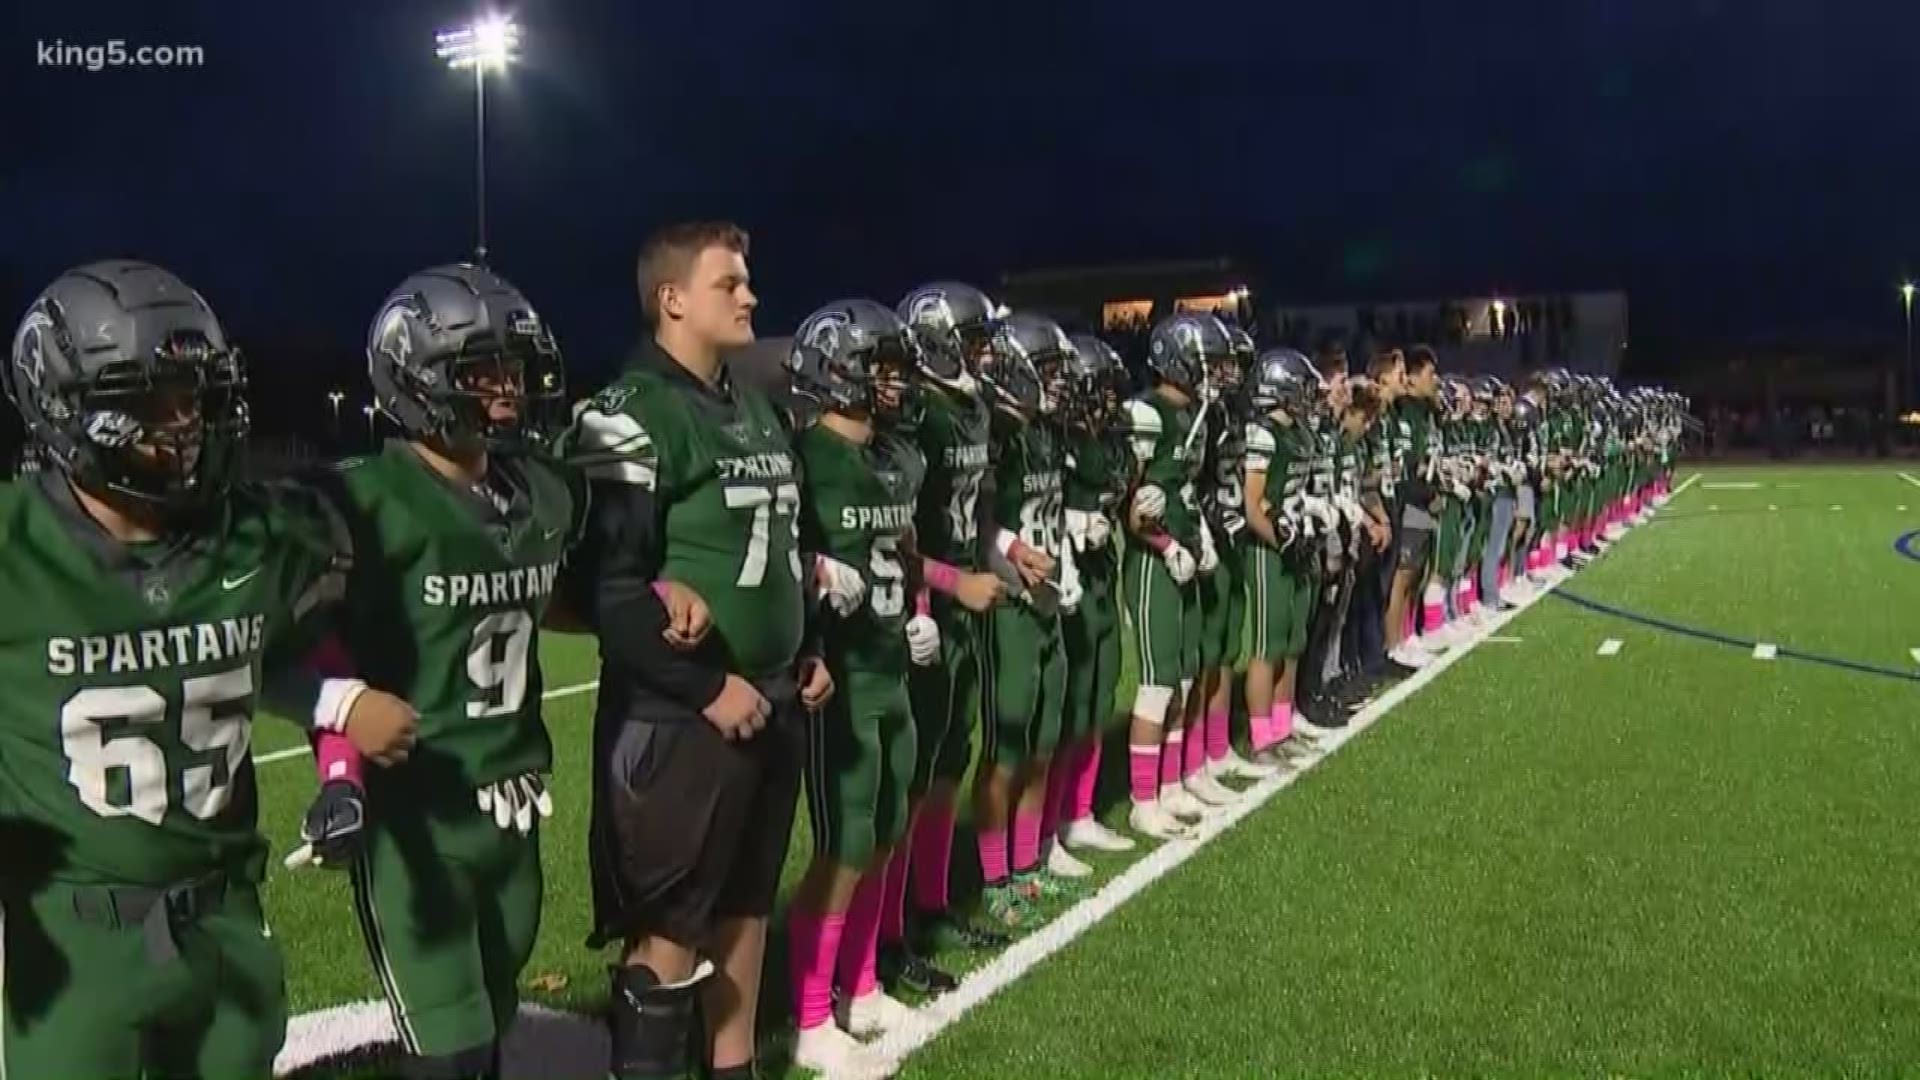 Students of Skyline High School held a moment of silence before Friday night's football game to remember two classmates who died from accidental fentanyl overdoses.